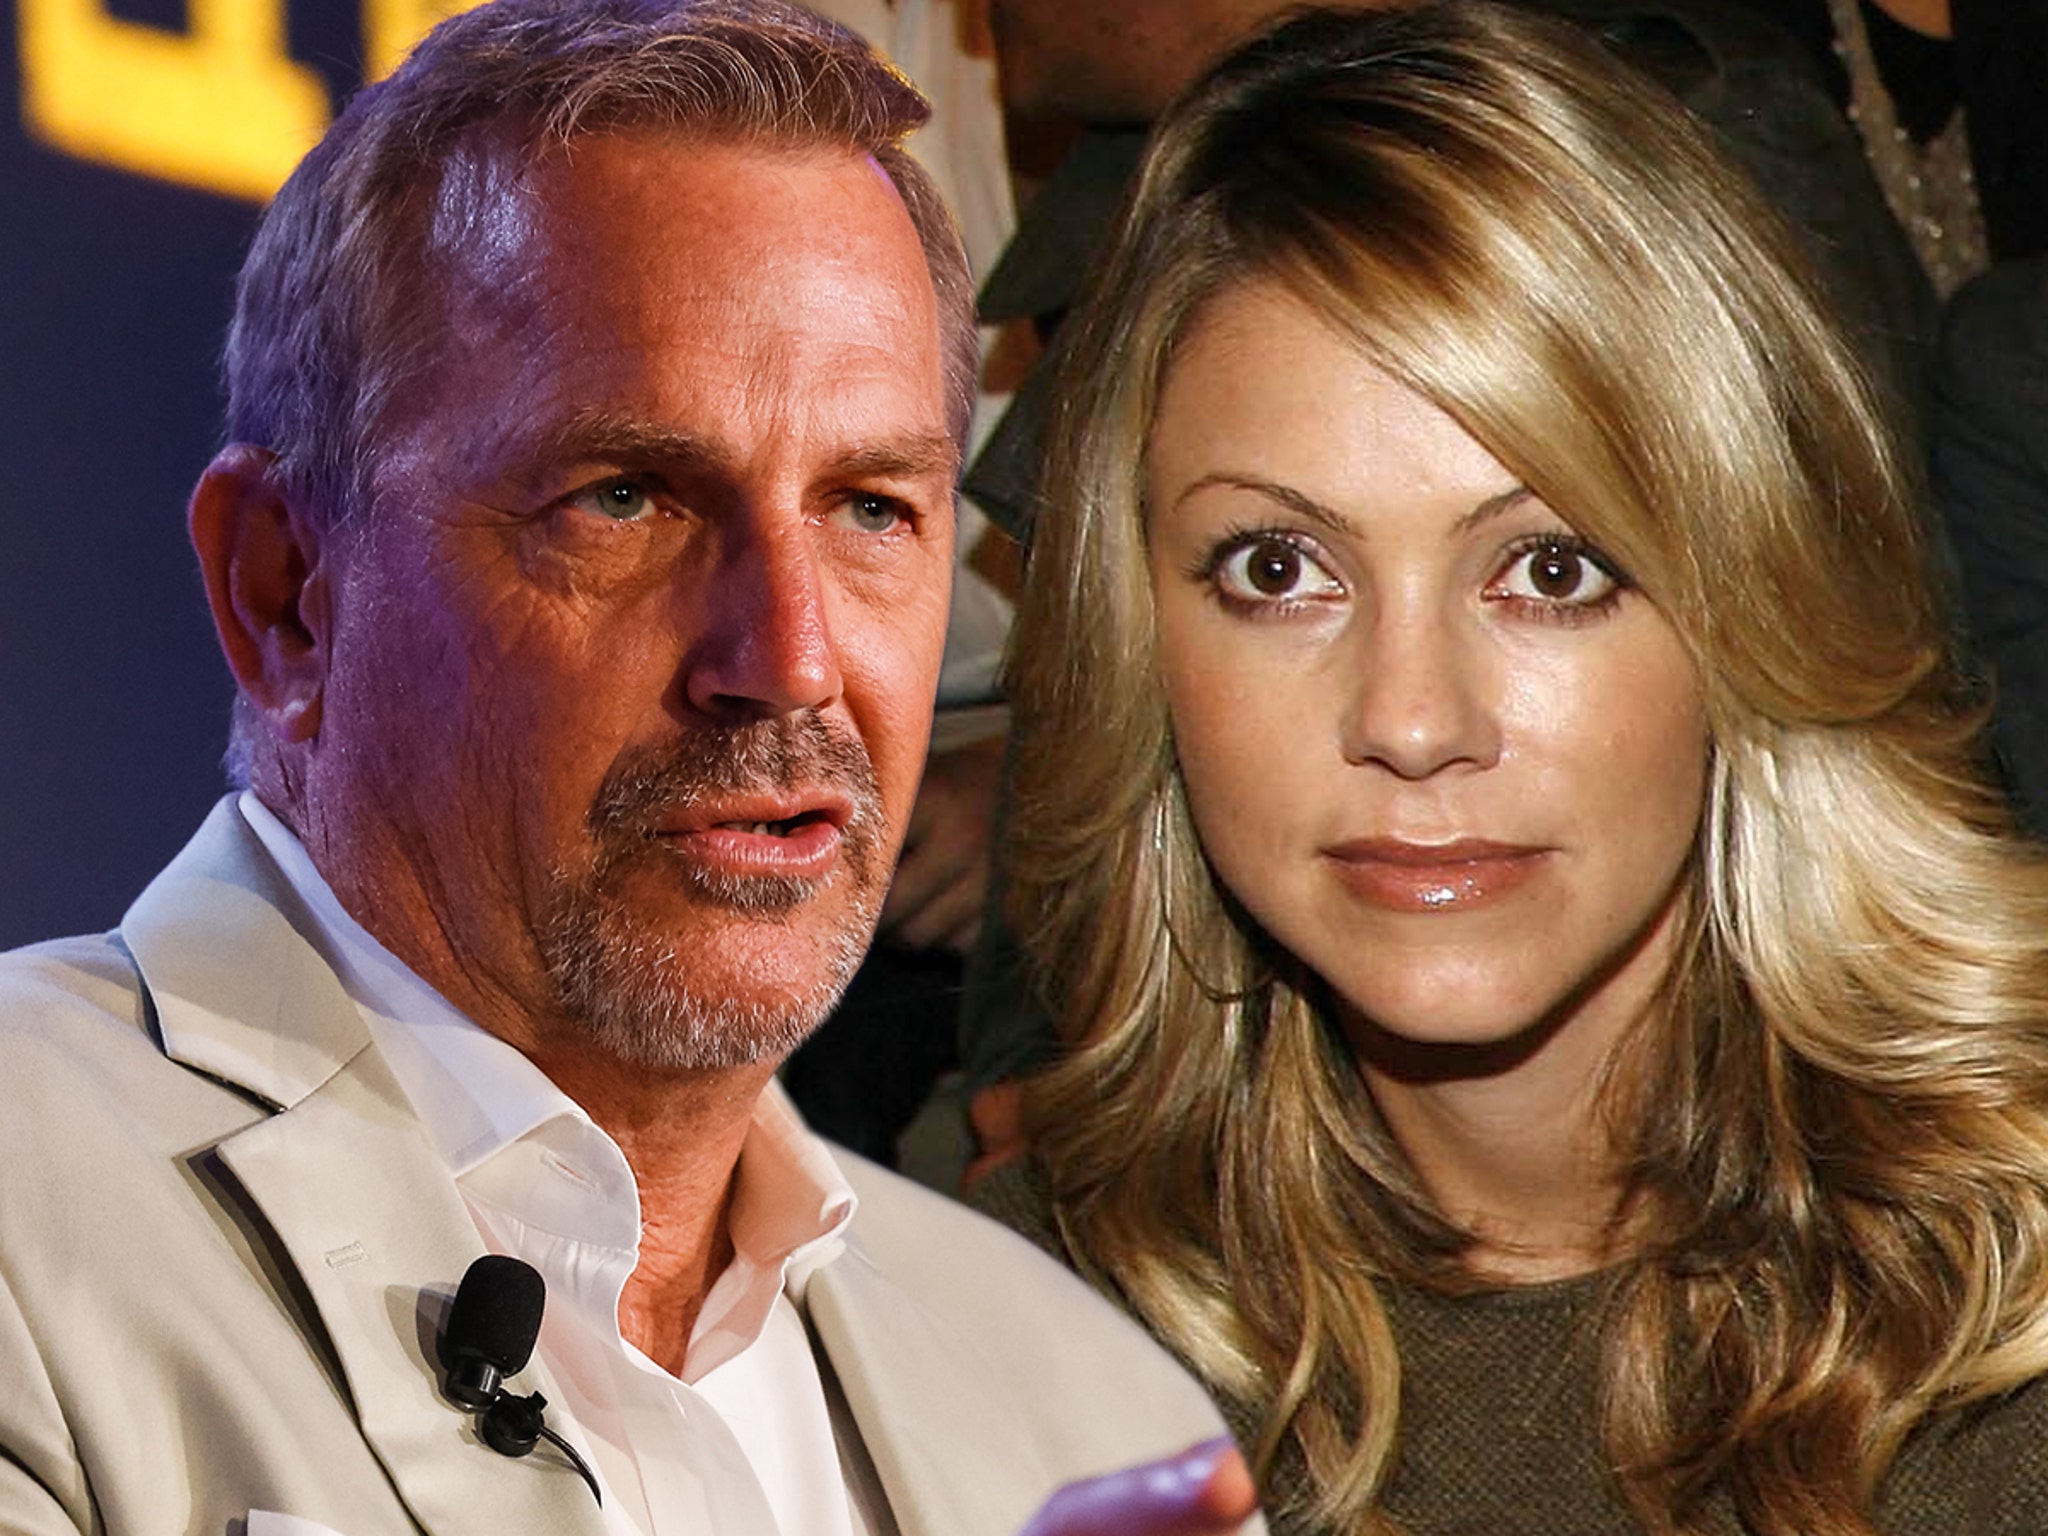 Kevin Costner Wins, Ordered To Pay Estranged Wife $63K In Child Support photo picture photo